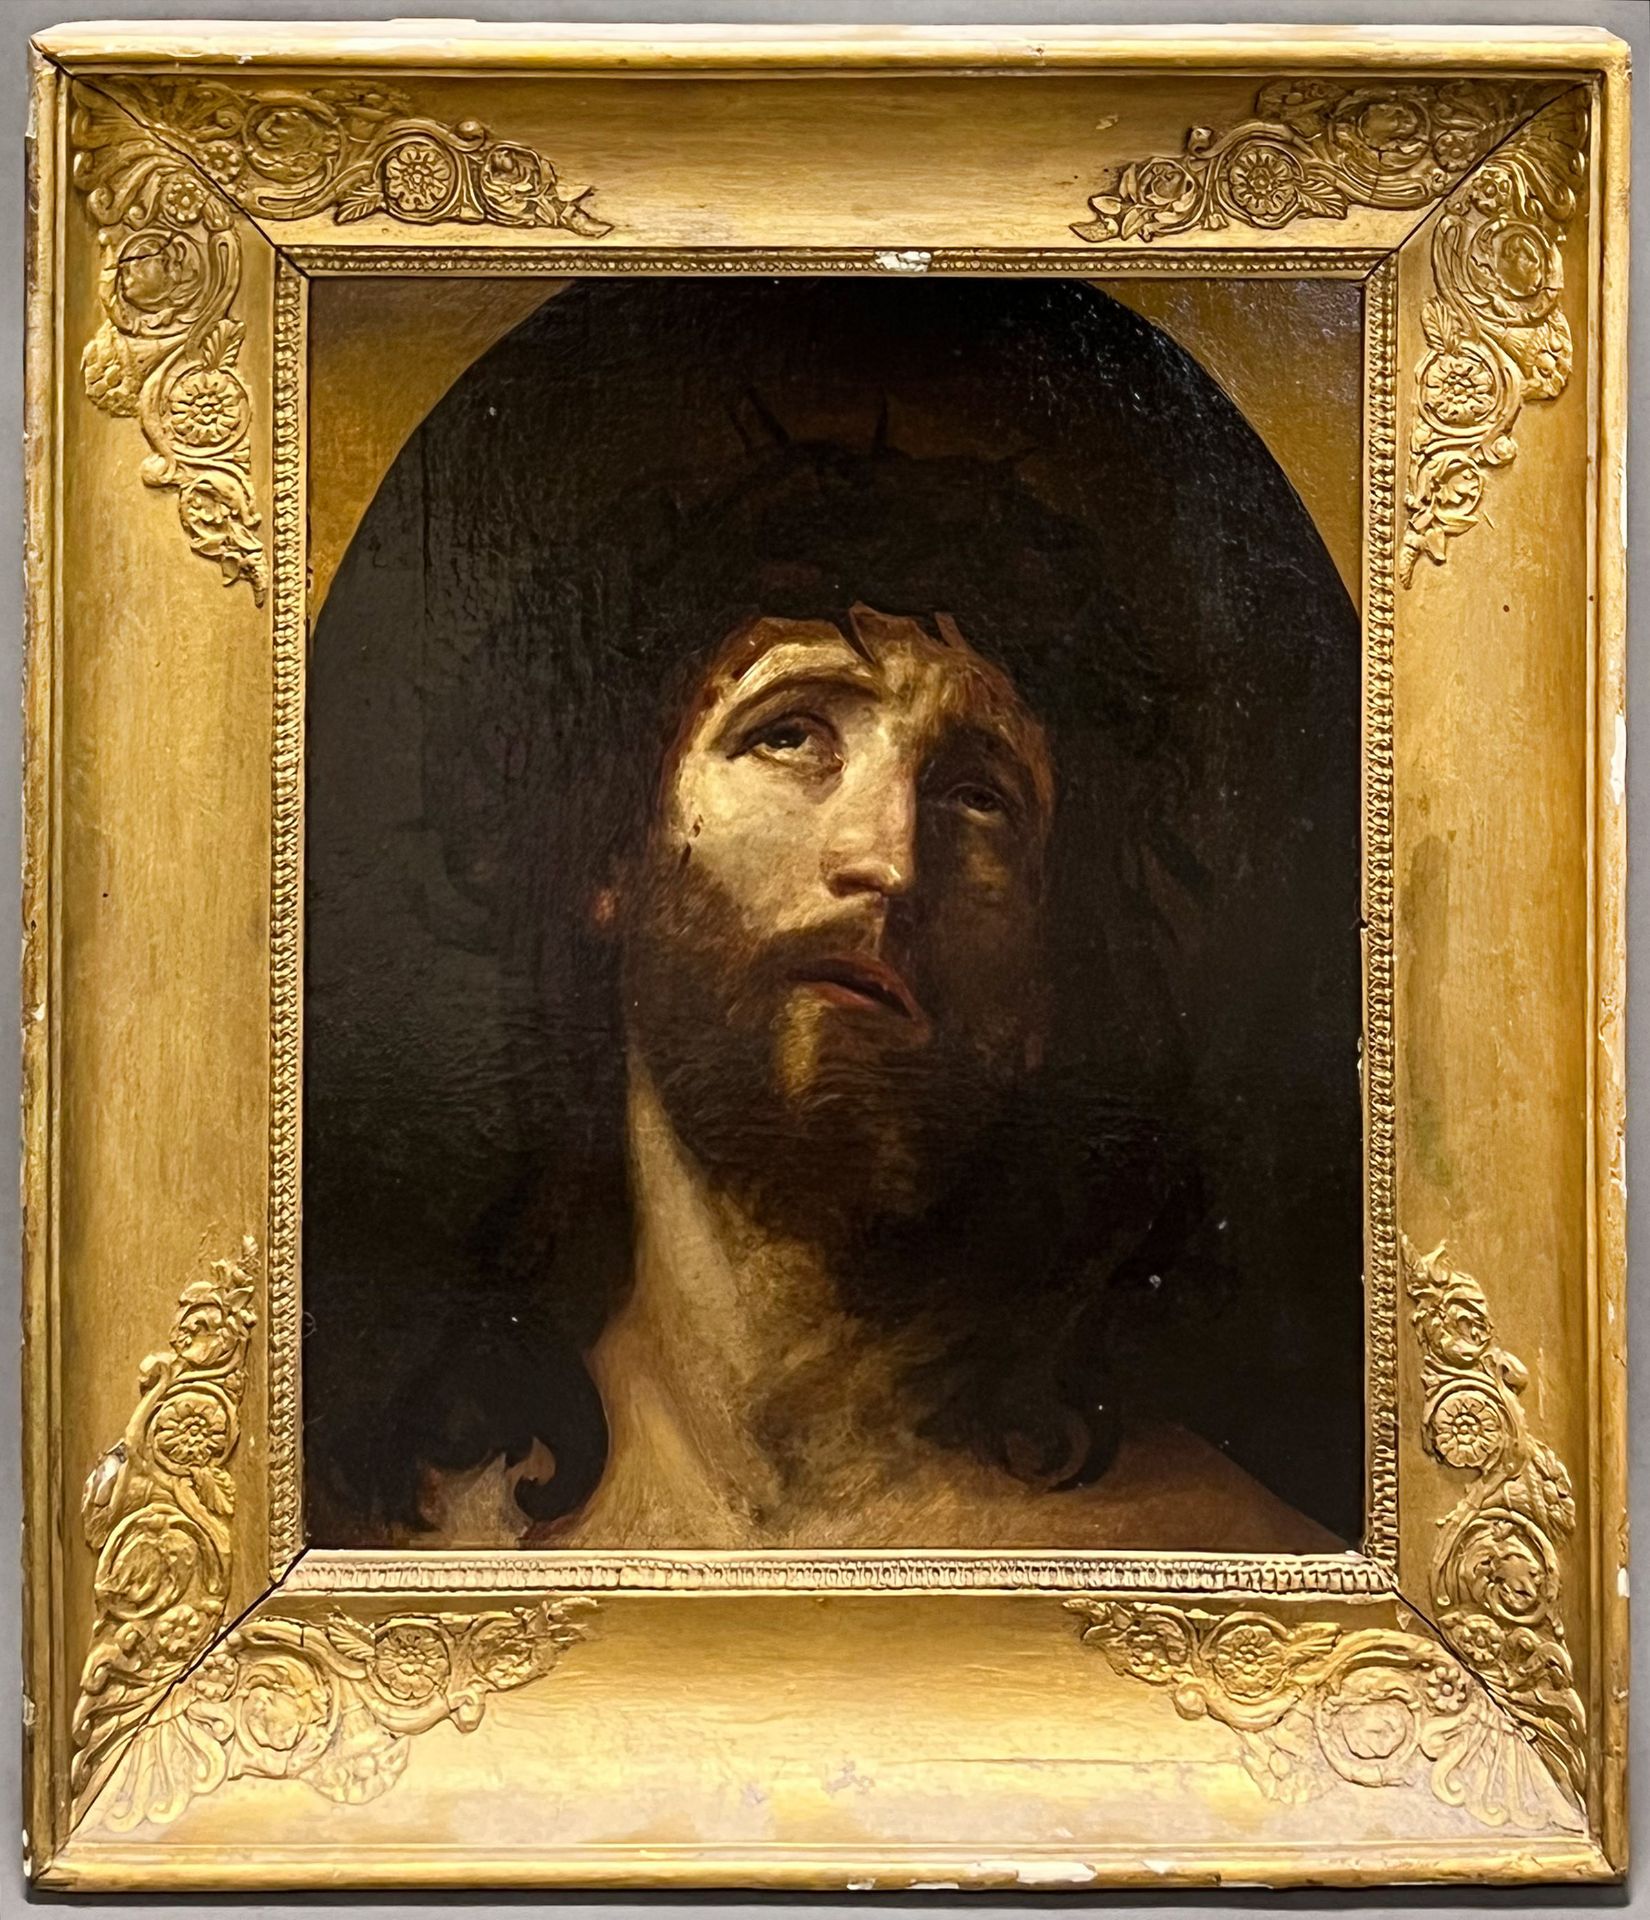 Guido RENI (1575 - 1642) Copy after. "Christ with crown of thorns". - Image 2 of 9